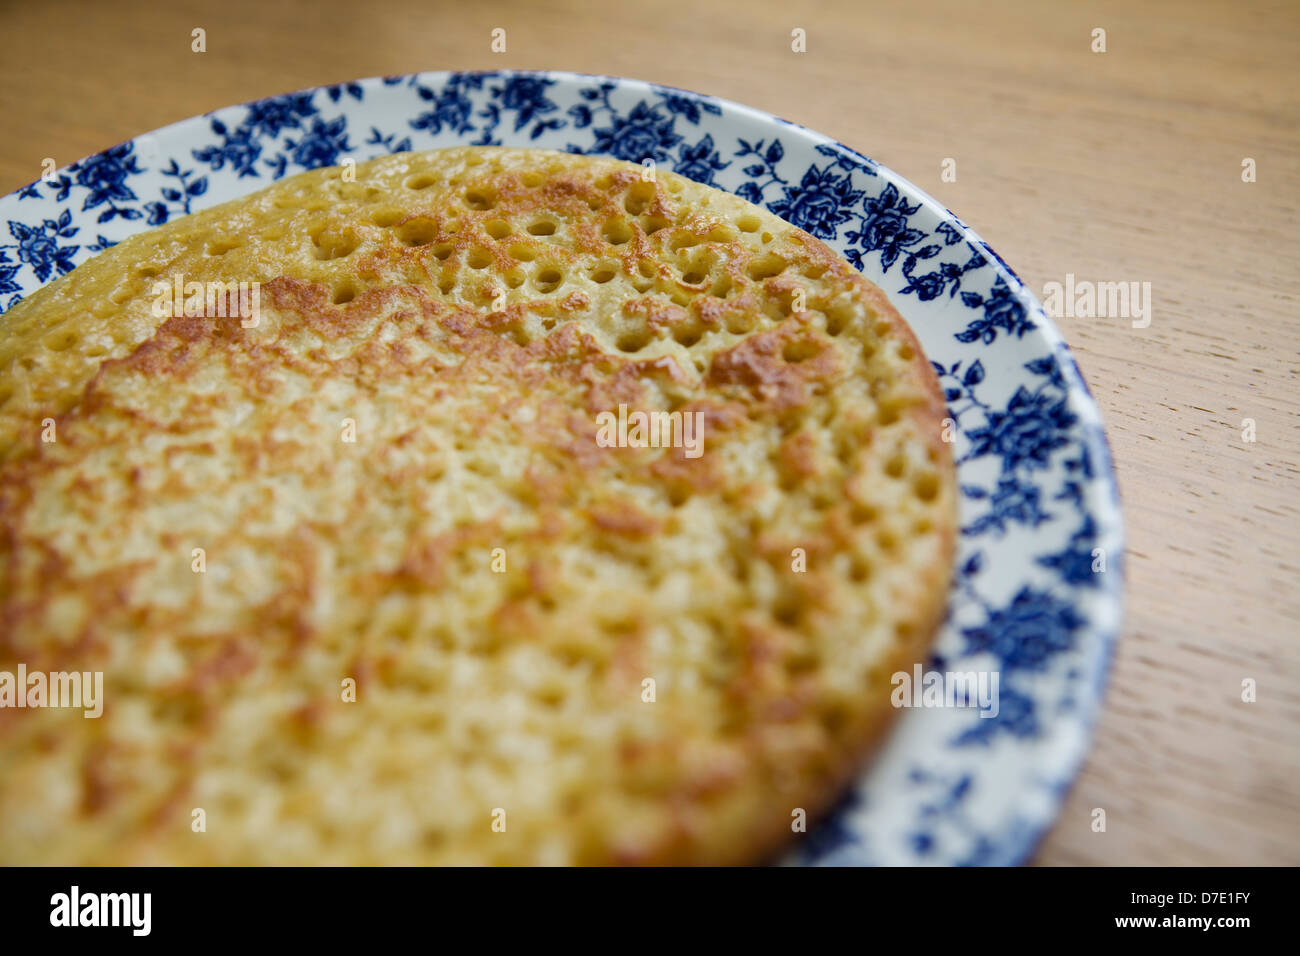 Homemade crumpet  on a vintage floral plate Stock Photo